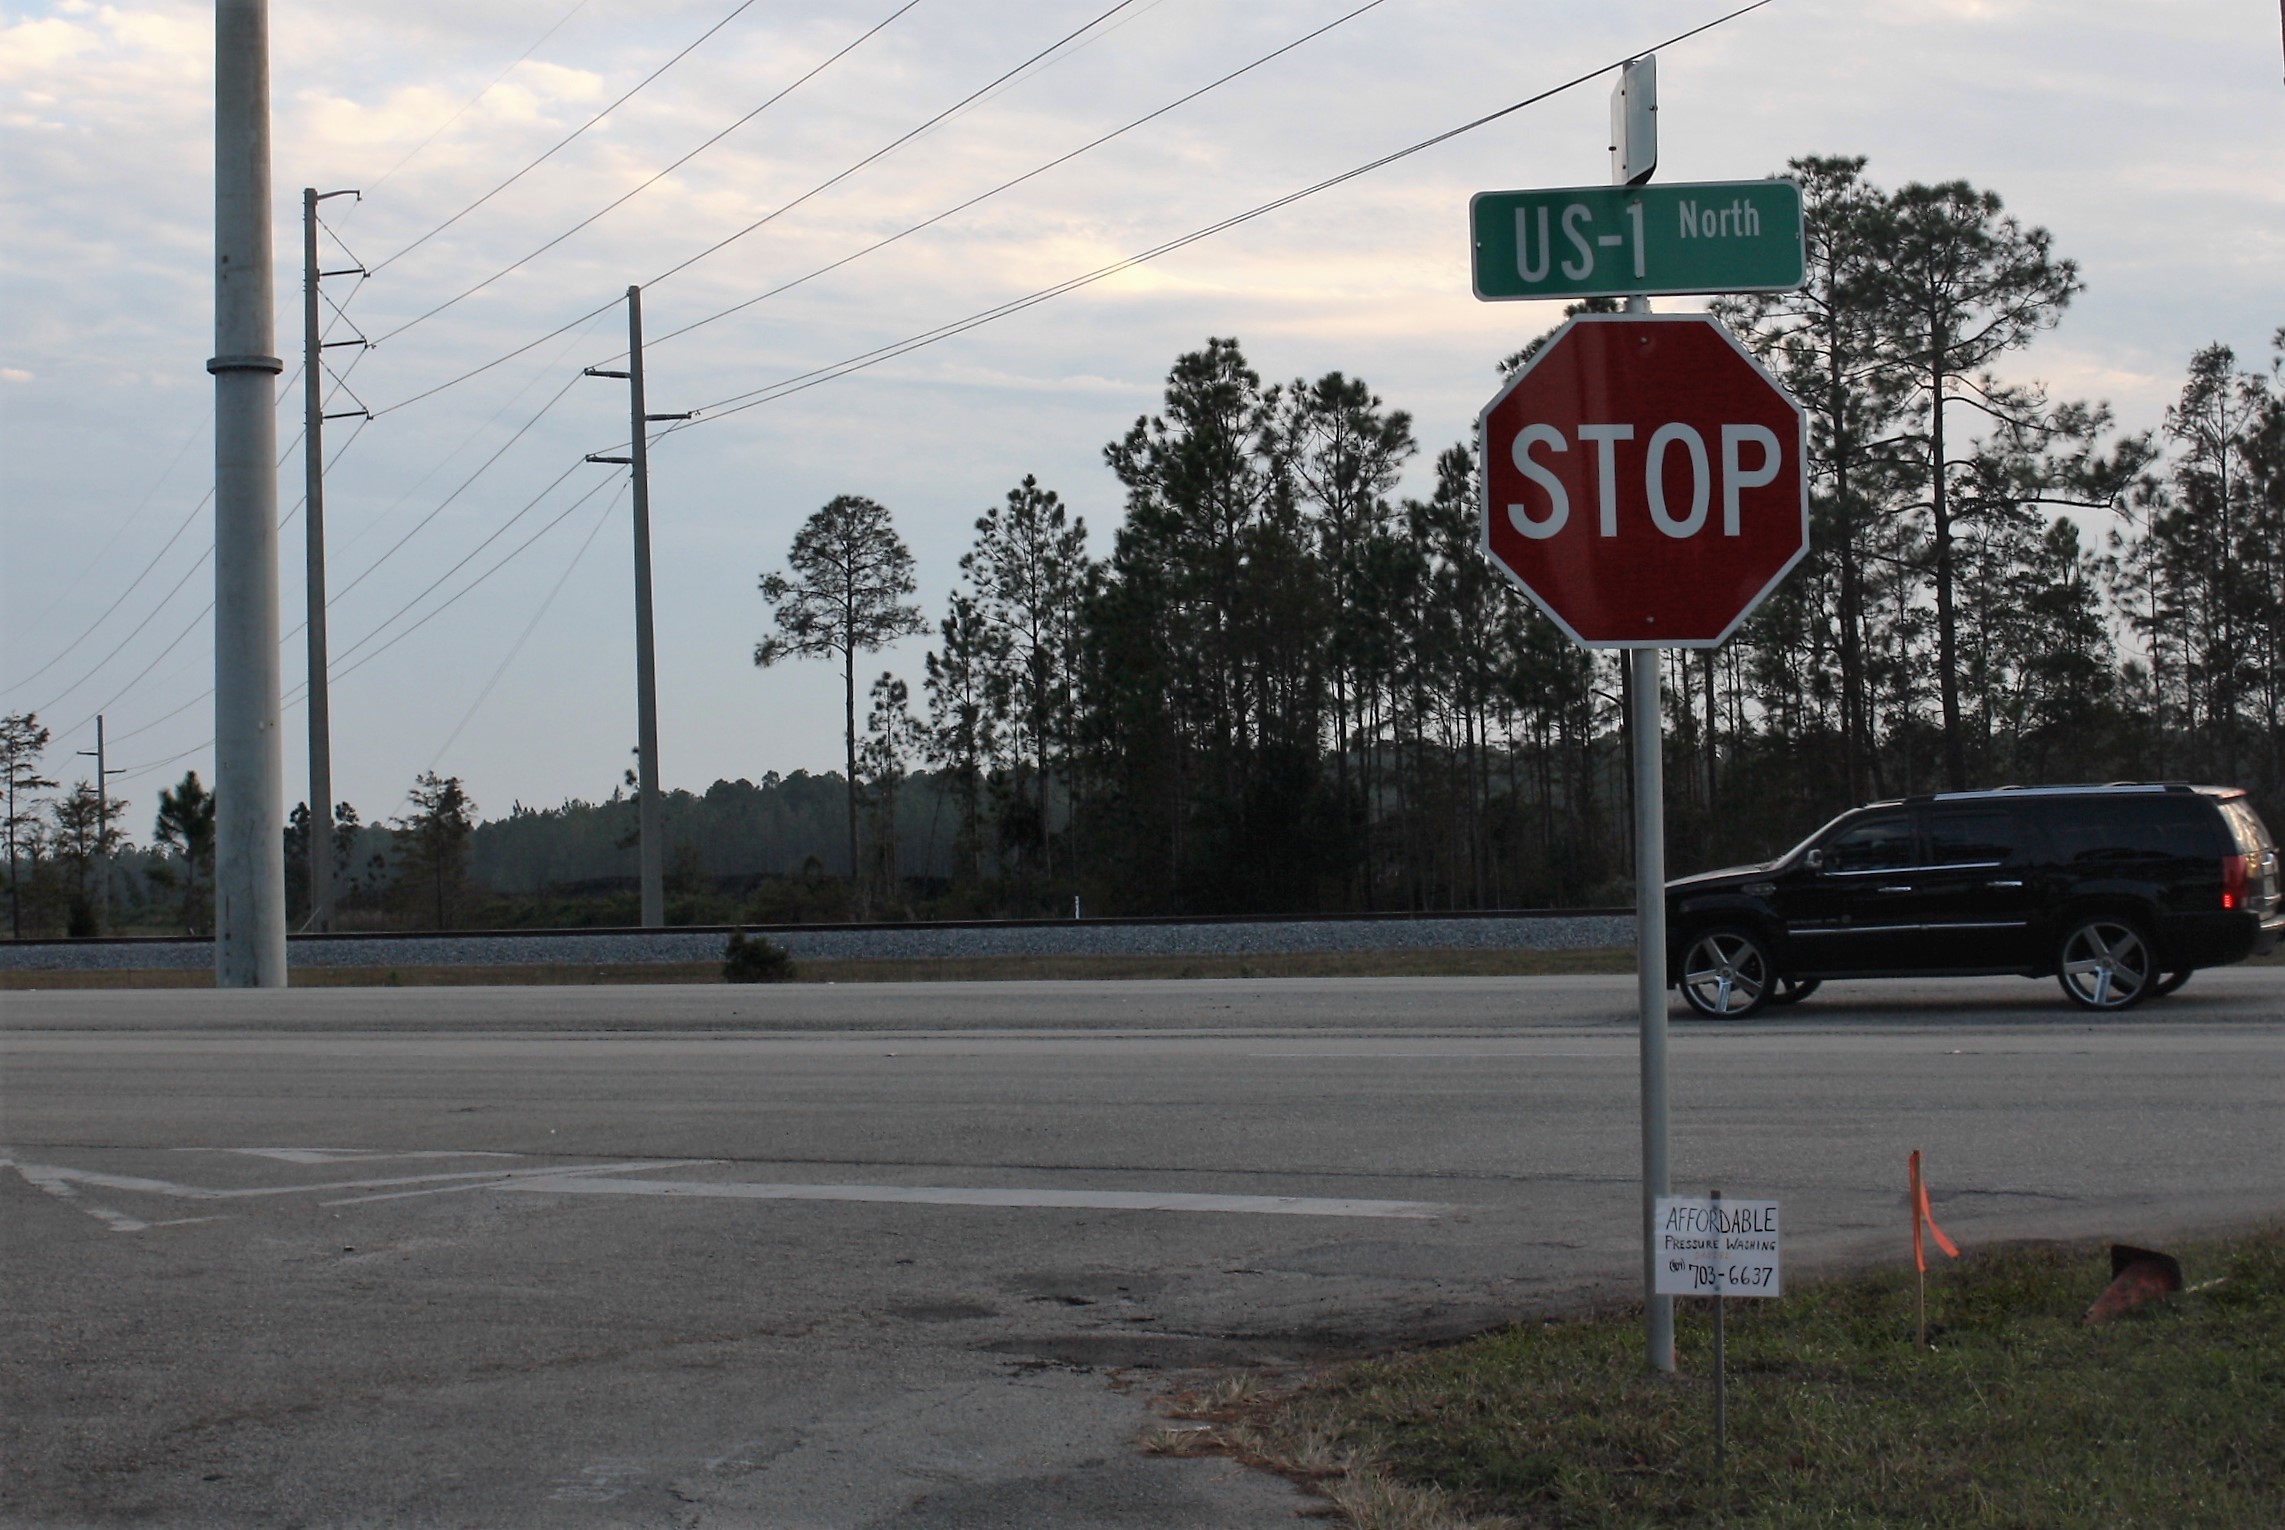 A teen was hit by a car Monday while skateboarding on Ray Road. The accident occurred not far from the intersection of Ray Road and US1, where two Nease High School students were critically injured in a car accident last month, prompting a public outcry for a stoplight to be installed.